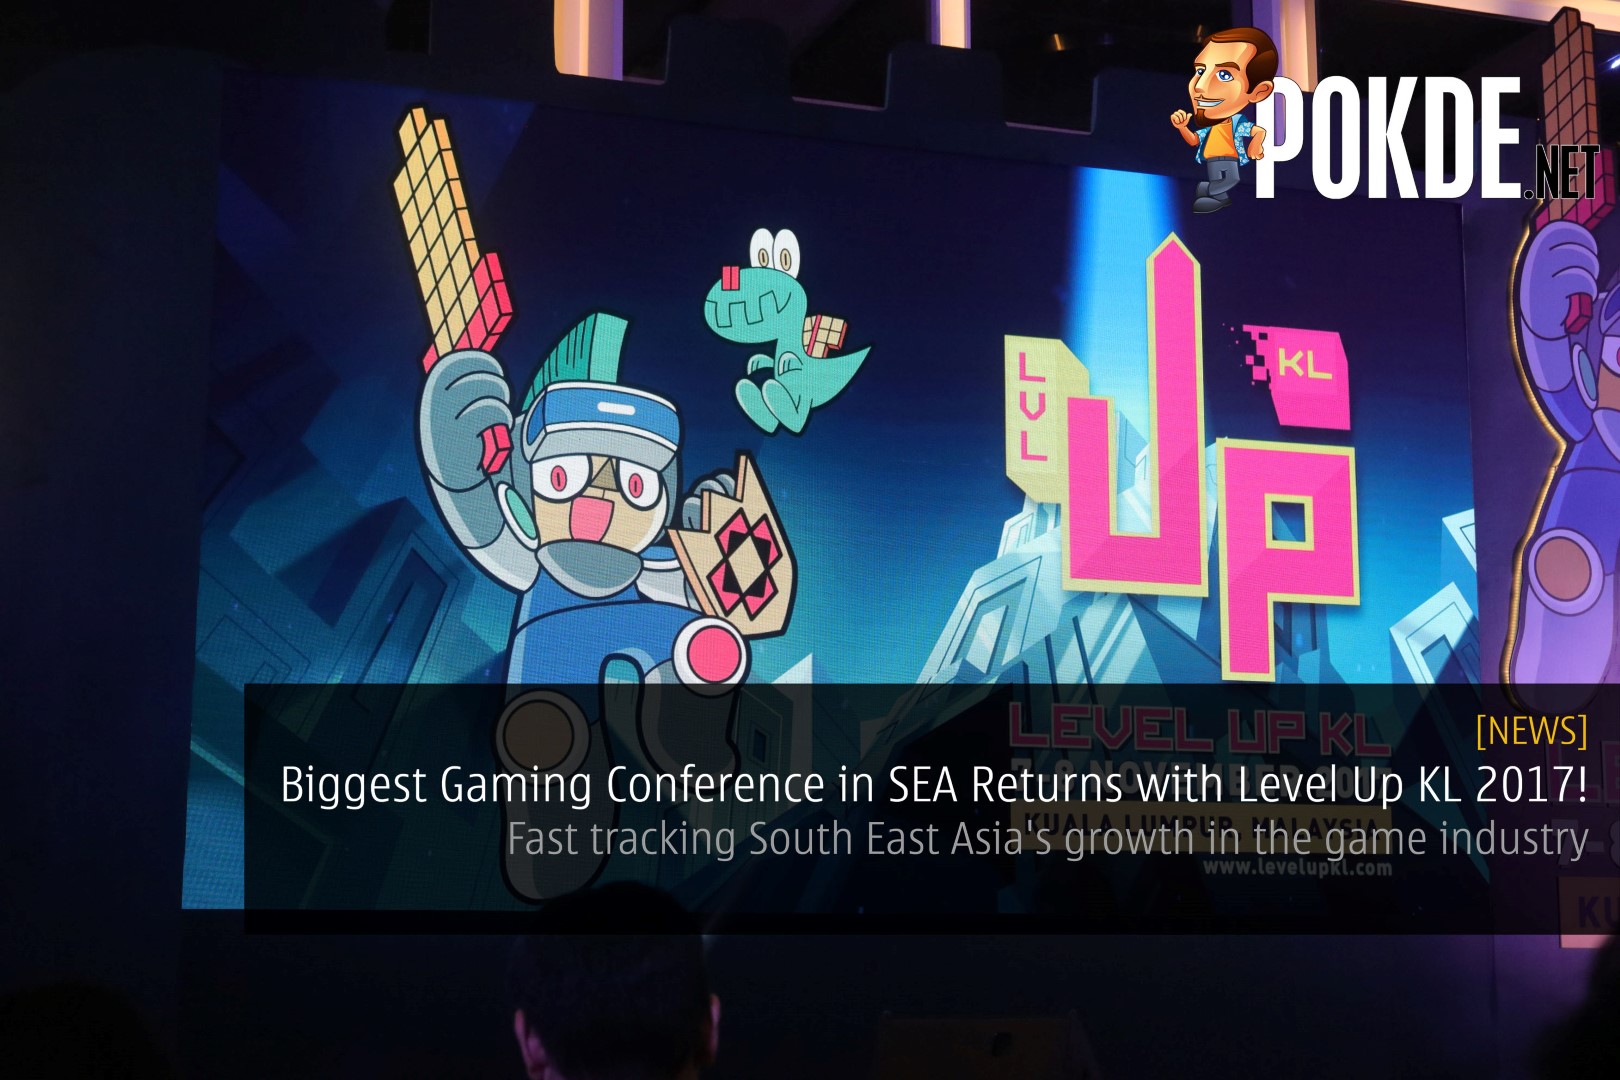 Biggest Gaming Conference in SEA Returns with Level Up KL 2017! - Fast tracking South East Asia's growth in the game industry 34